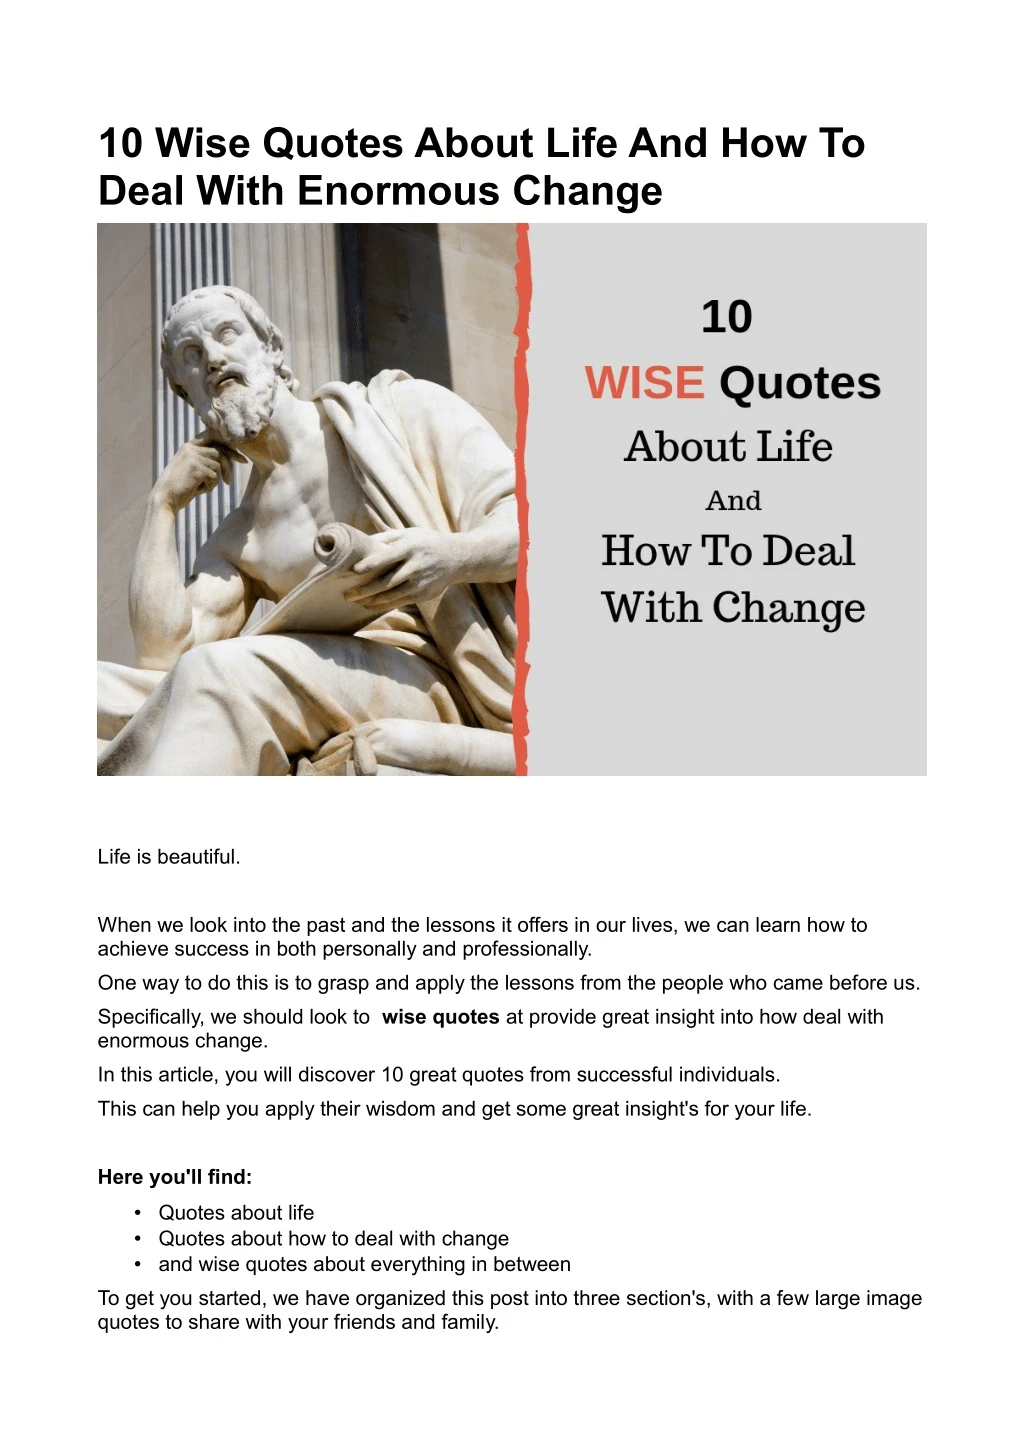 10 wise quotes about life and how to deal with